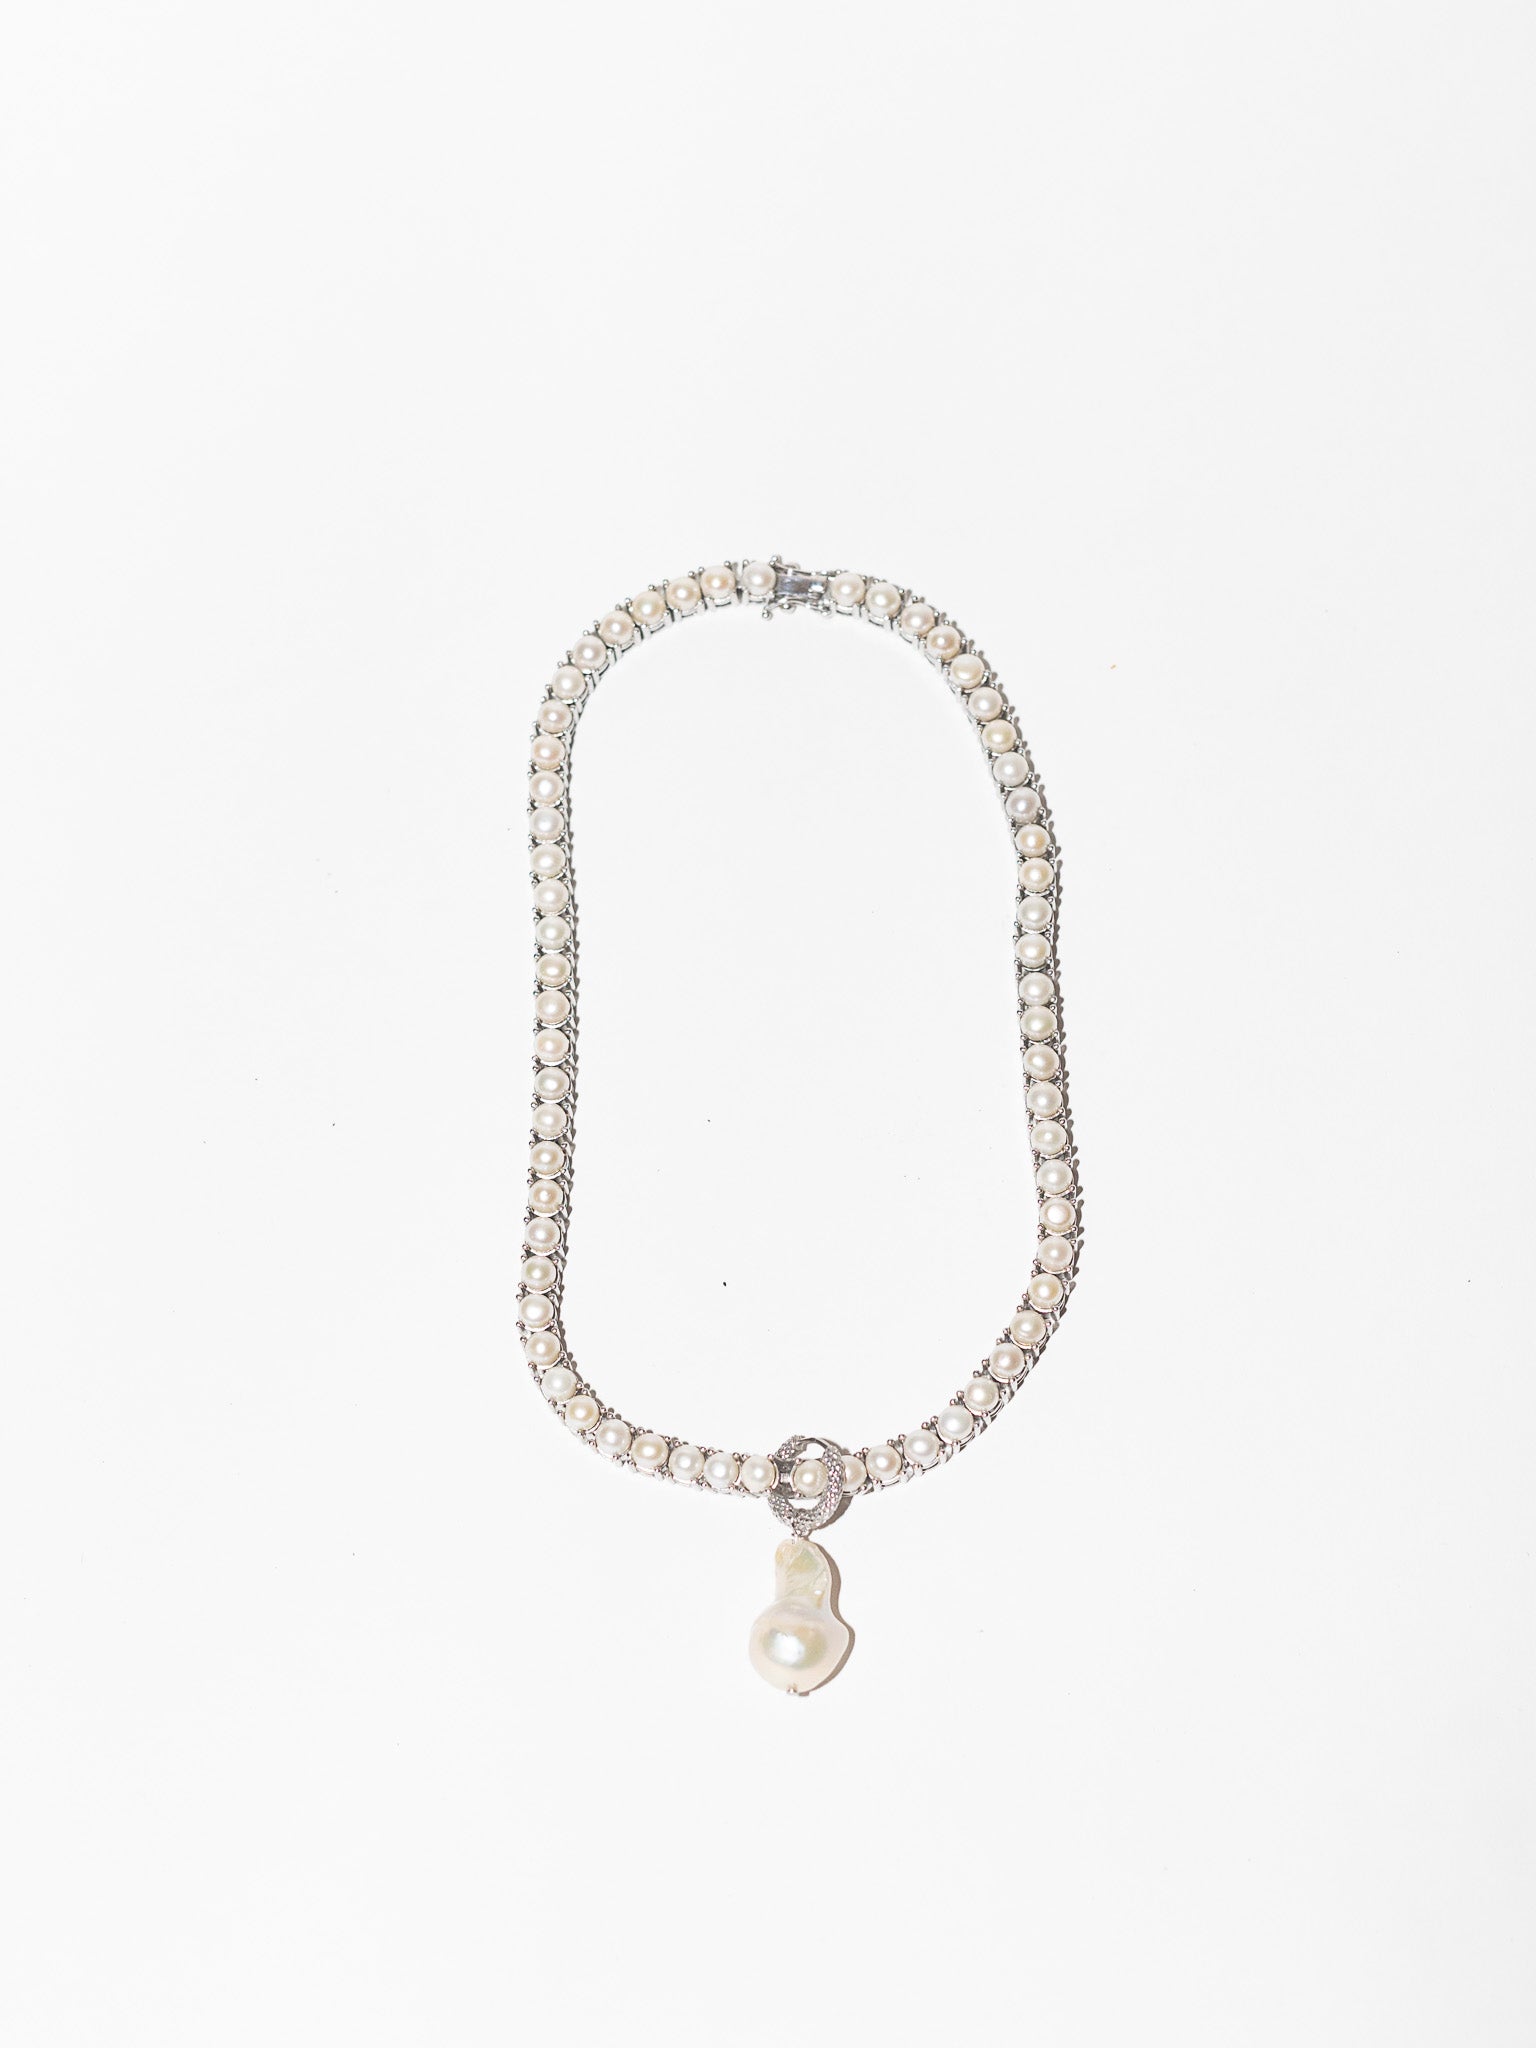 PEARL AND SILVER TENNIS NECKLACE